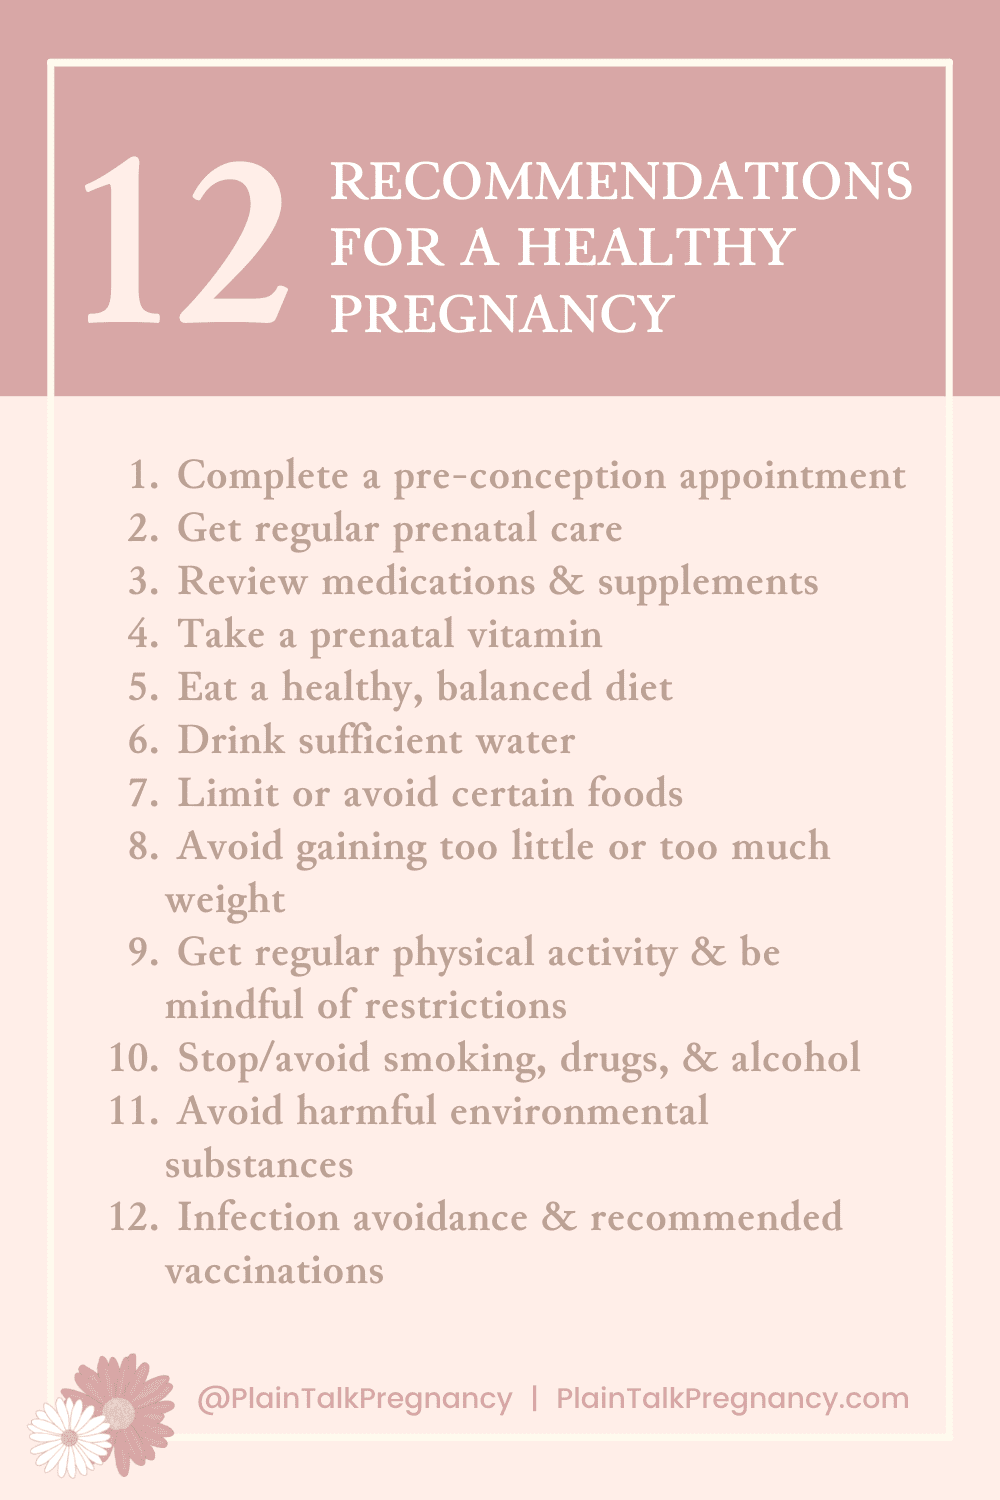 12 Recommendations for a Healthy Pregnancy:  Complete a pre-conception appointment  Get regular prenatal care  Review medications & supplements  Take a prenatal vitamin  Eat a healthy, balanced diet  Drink sufficient water  Limit or avoid certain foods  Avoid gaining too little or too much weight  Get regular physical activity & be mindful of restrictions  Stop/avoid smoking, drugs, & alcohol  Avoid harmful environmental substances  Infection avoidance & recommended vaccinations - Image created by PlainTalkPregnancy.com